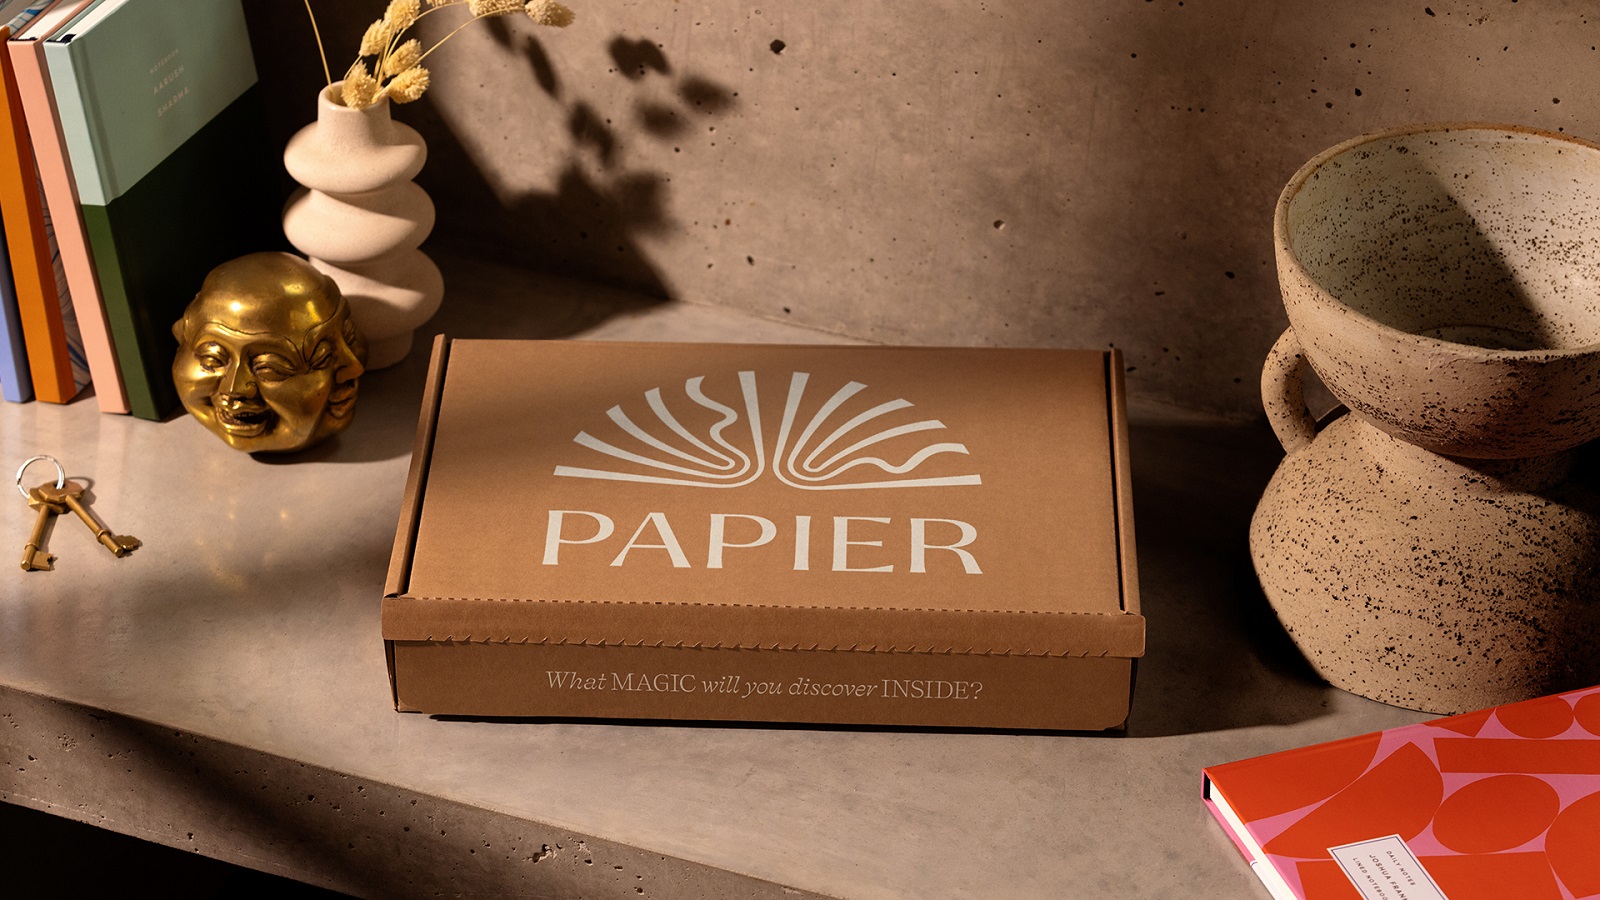 Papier Continues Its Story with a New Visual Chapter